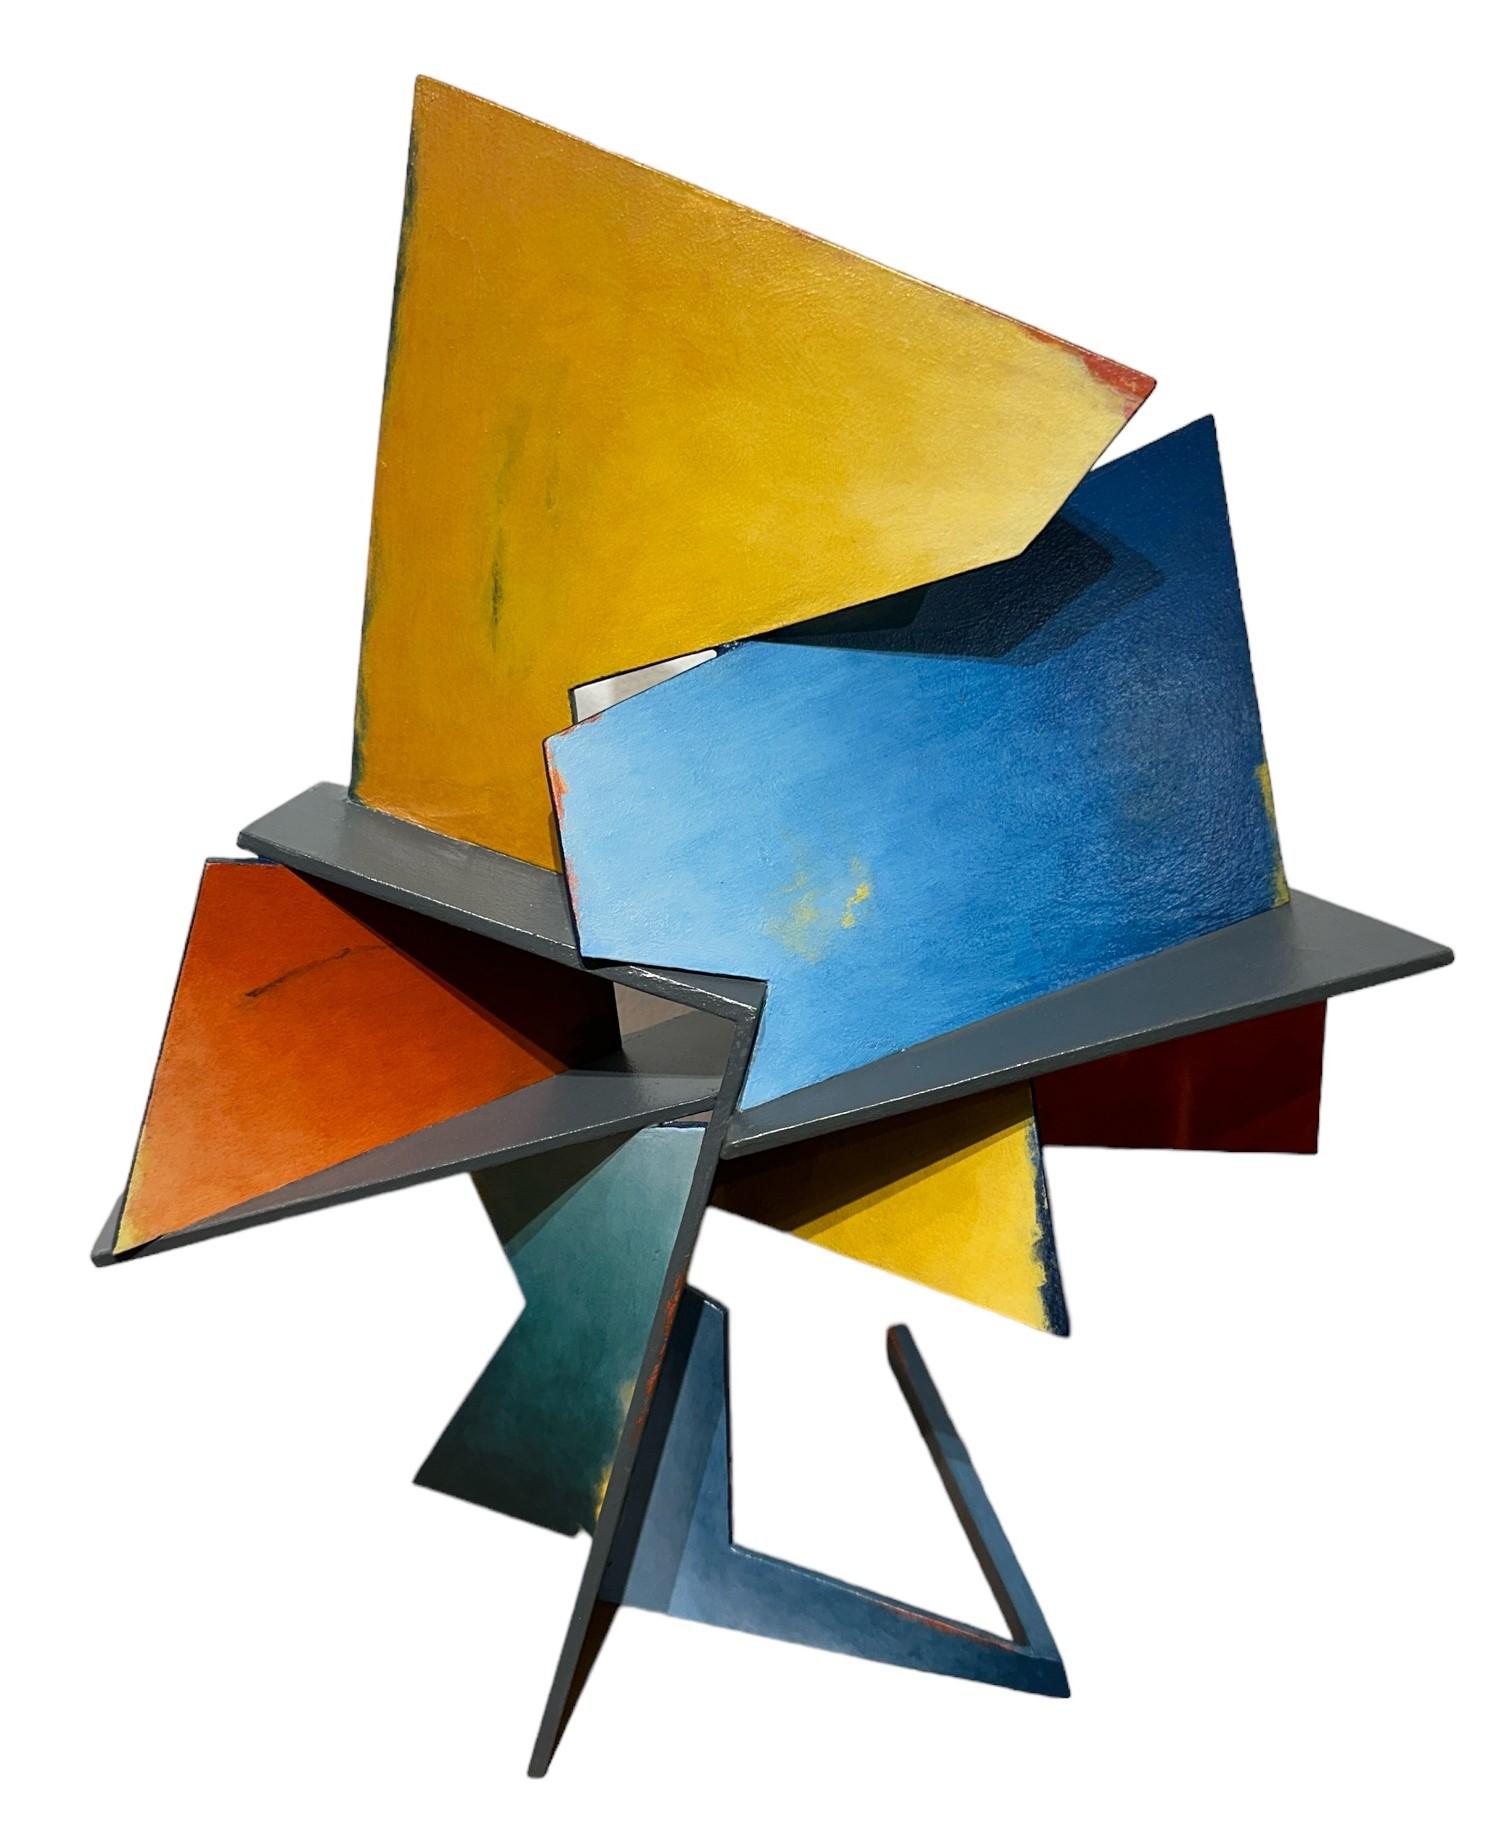 This dynamic table sized sculpture is created from sheets of steel welded together in an abstract geometric pattern. While the work adheres to a rigid, rational geometry, this sculptures suggest lyrical movement, apparent weightlessness and